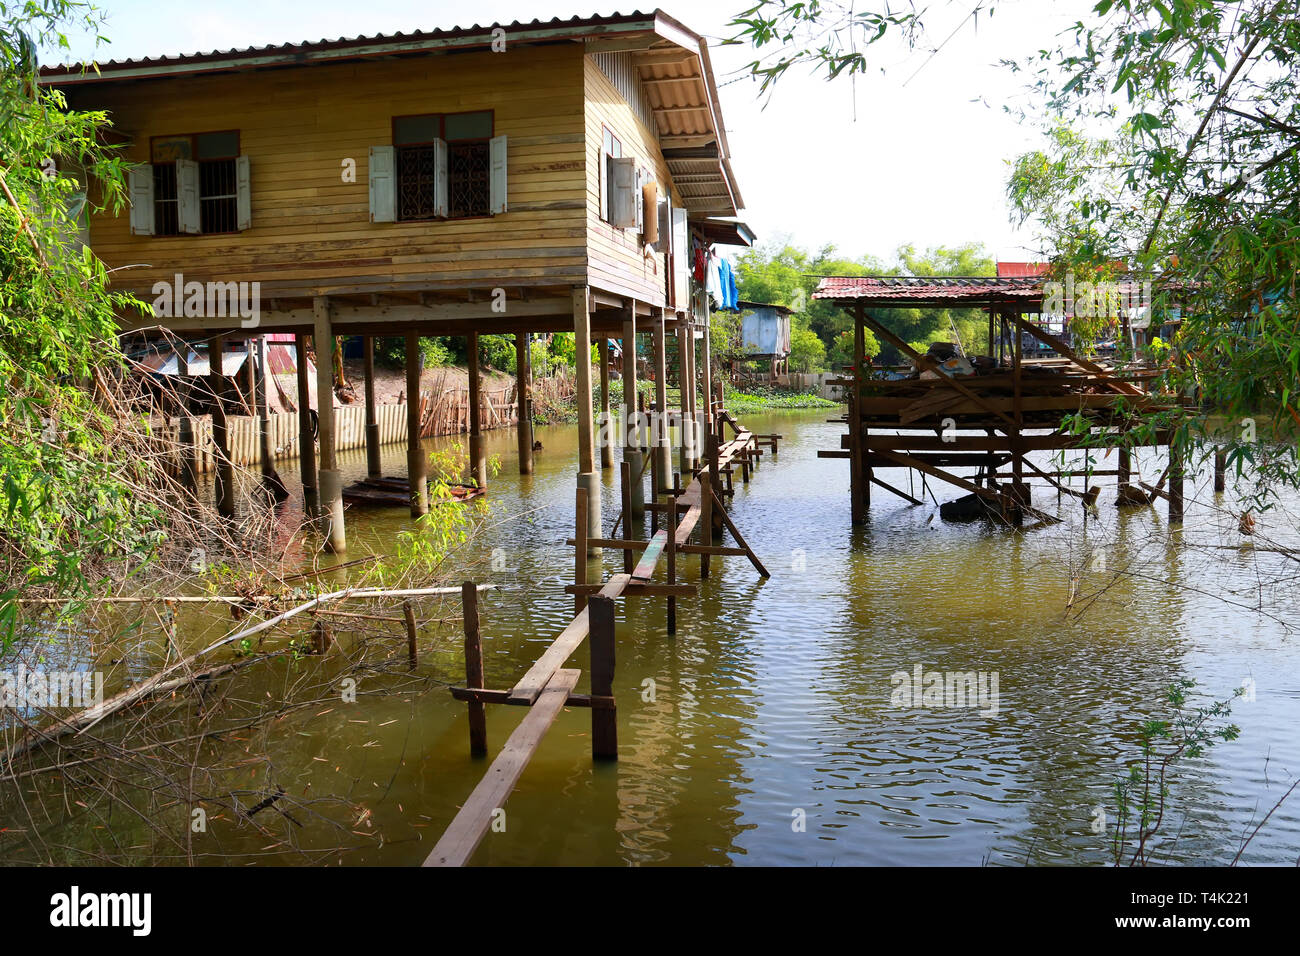 wooden house flooded, old rural house in water Stock Photo